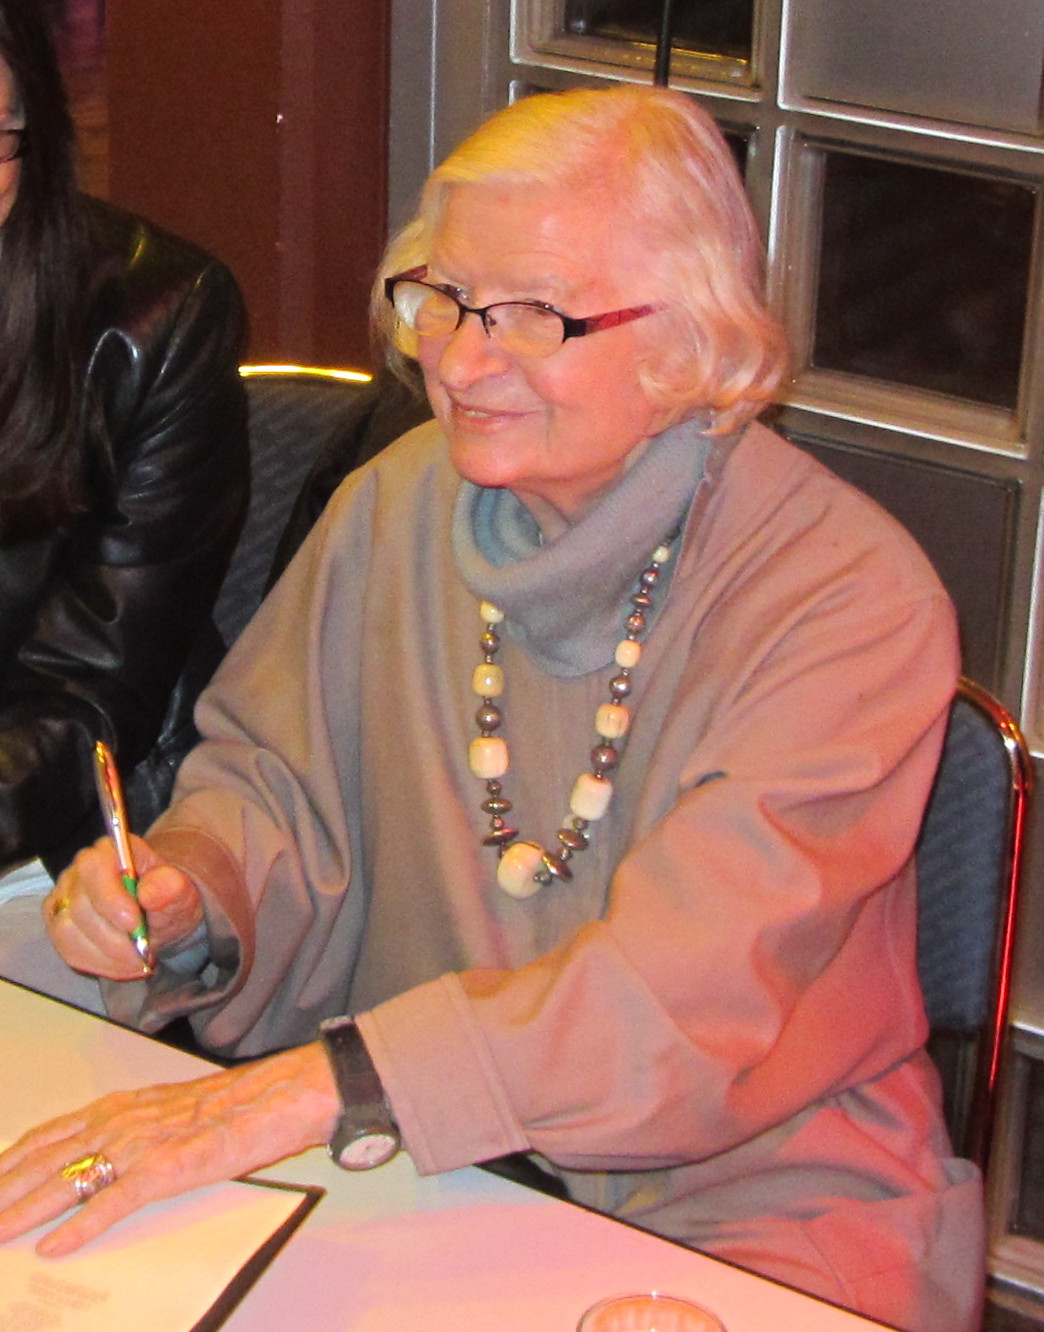 P. D. James, English author (b. 1920) died on November 27, 2014.